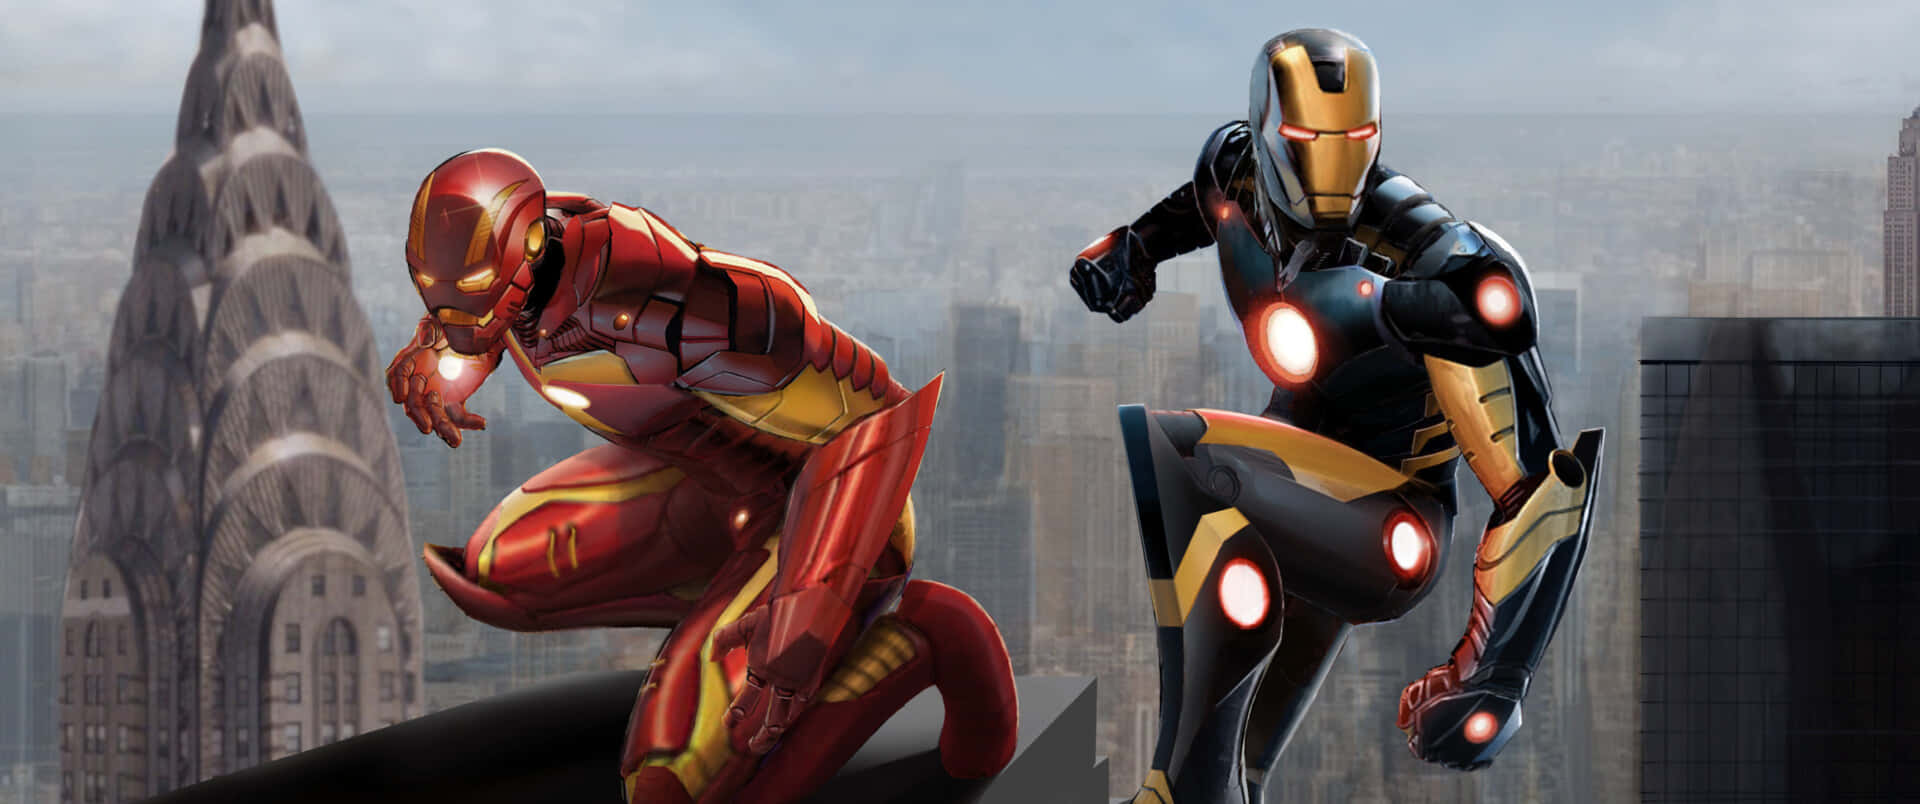 two iron man characters are flying over a city